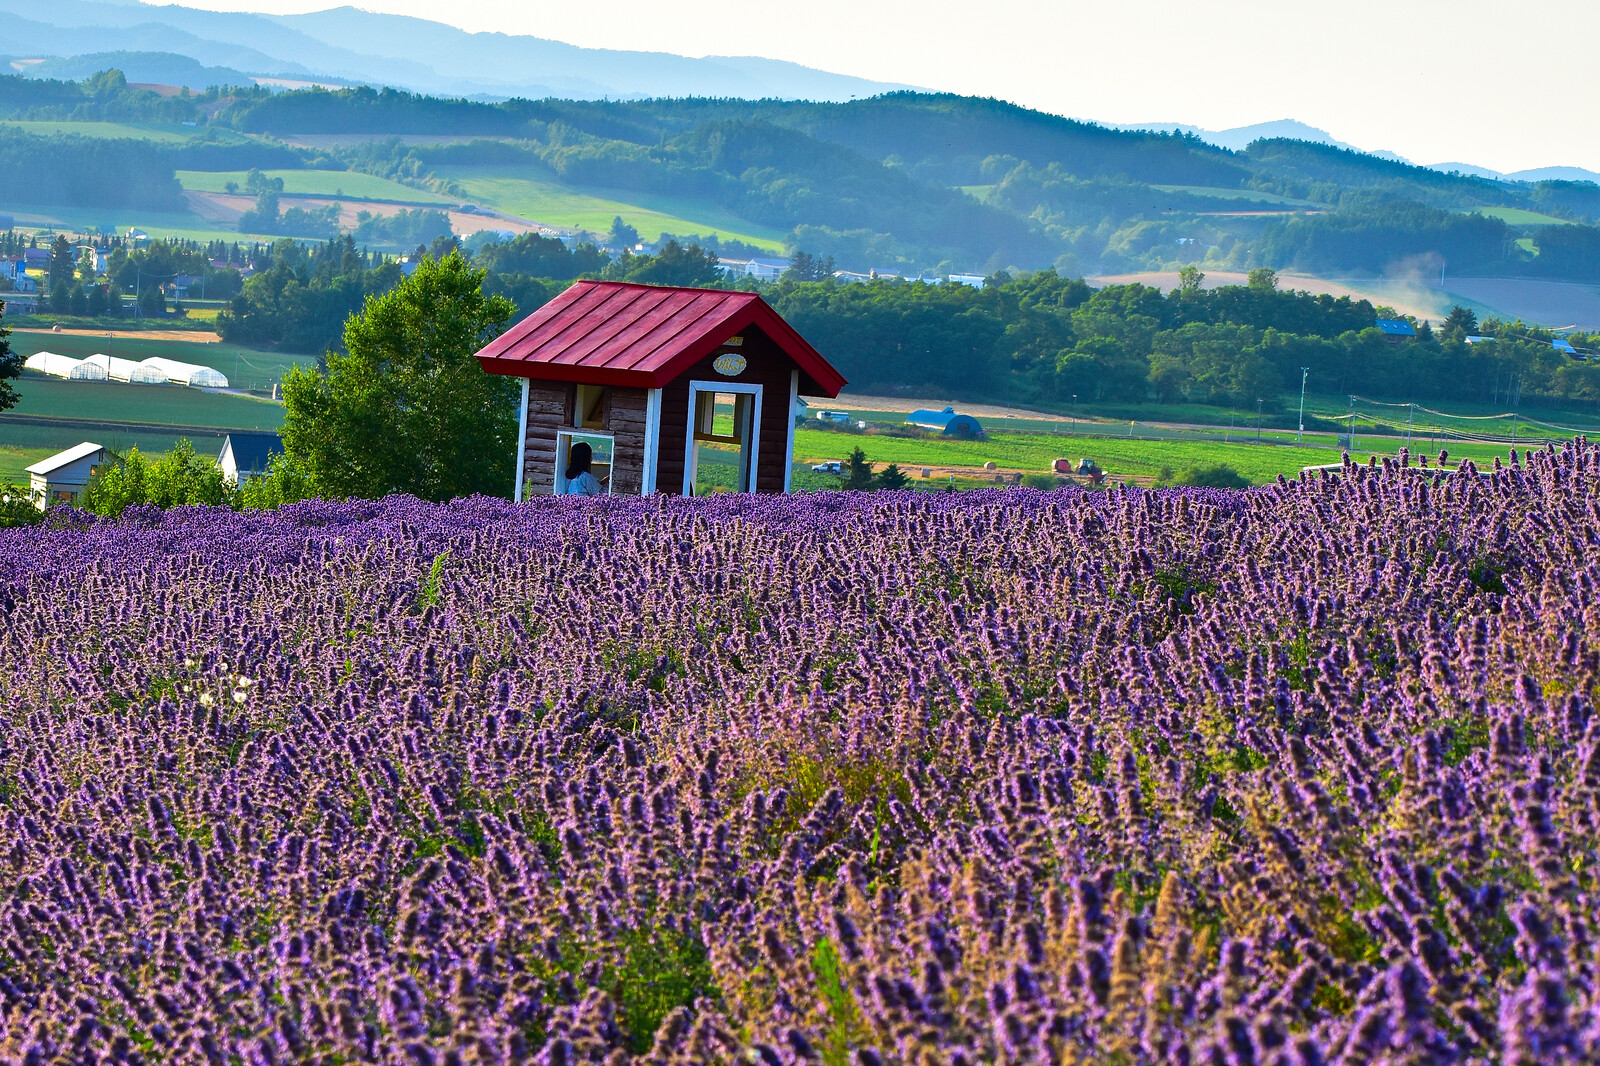 Lavenders-during-the-golden-hour.jpg